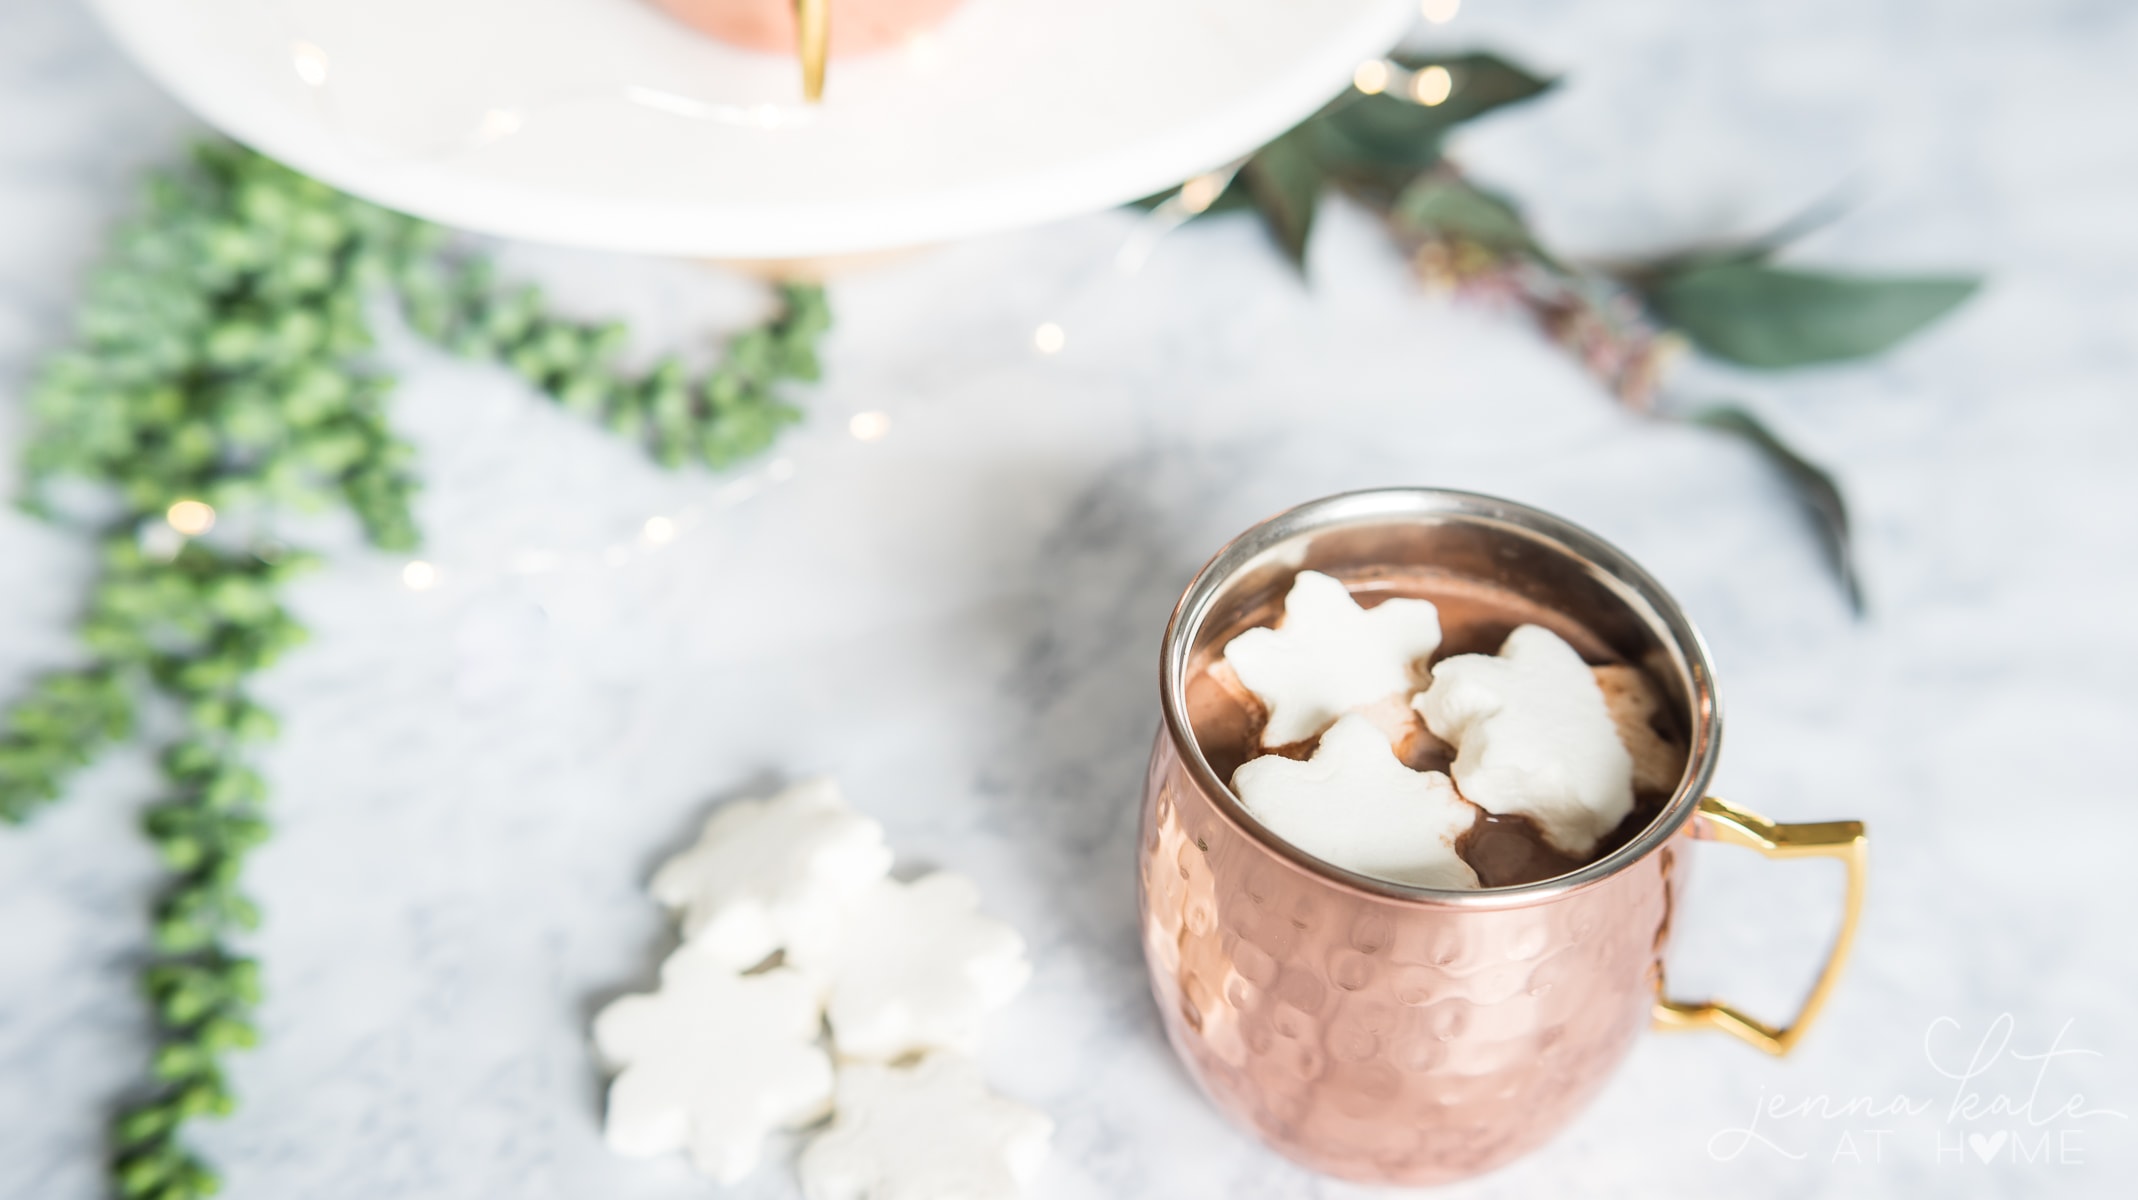 This rich and creamy hot chocolate recipe only calls for 3 ingredients and is perfect for holiday parties